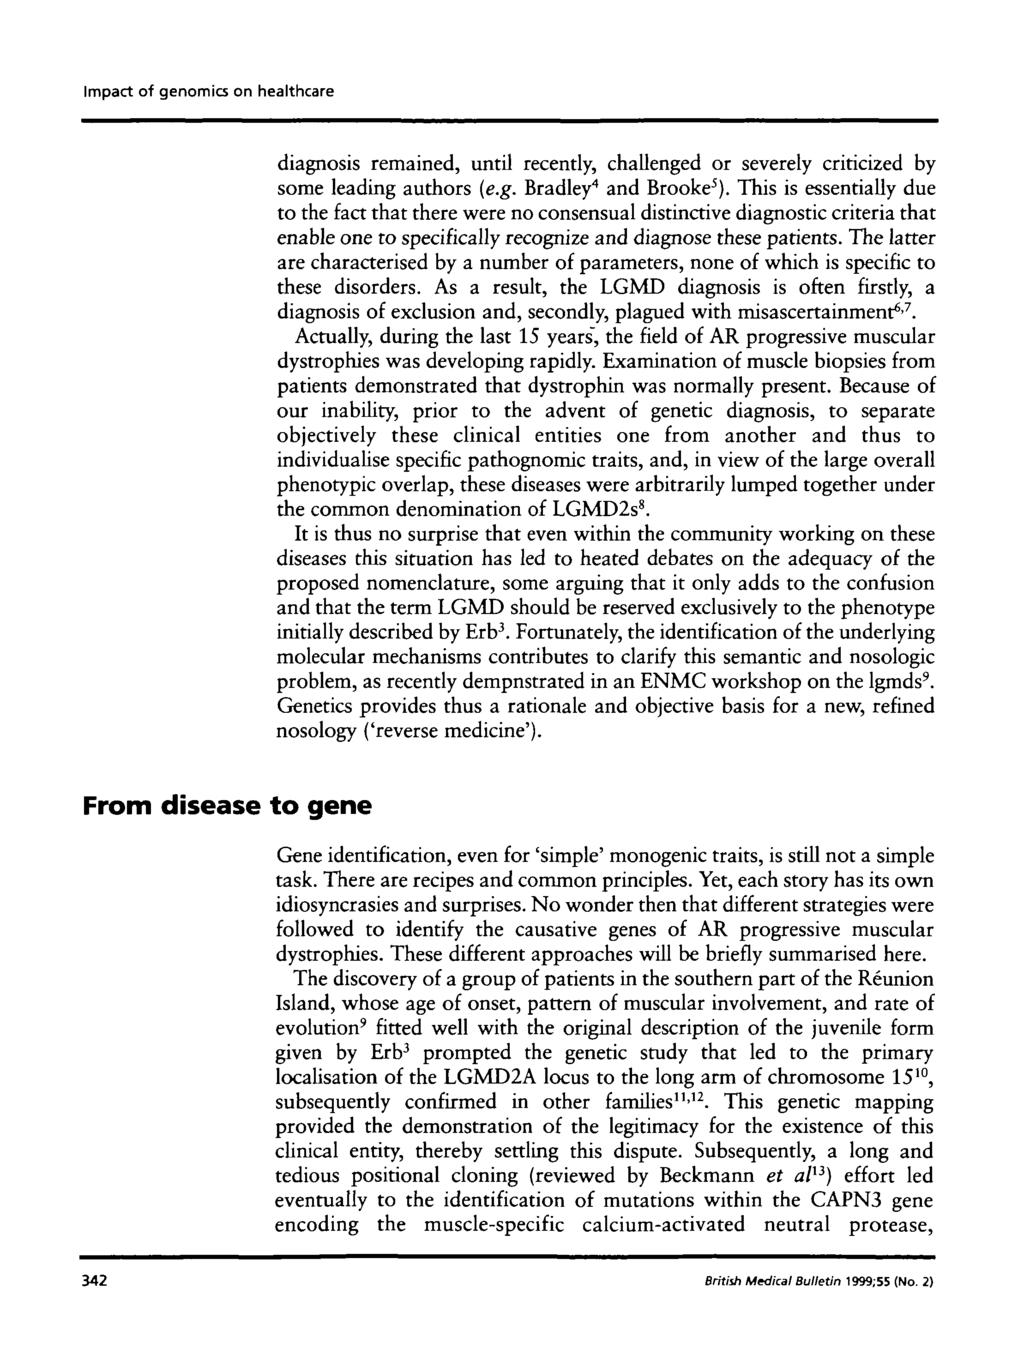 Impact of genomics on healthcare diagnosis remained, until recently, challenged or severely criticized by some leading authors (e.g. Bradley 4 and Brooke 5 ).